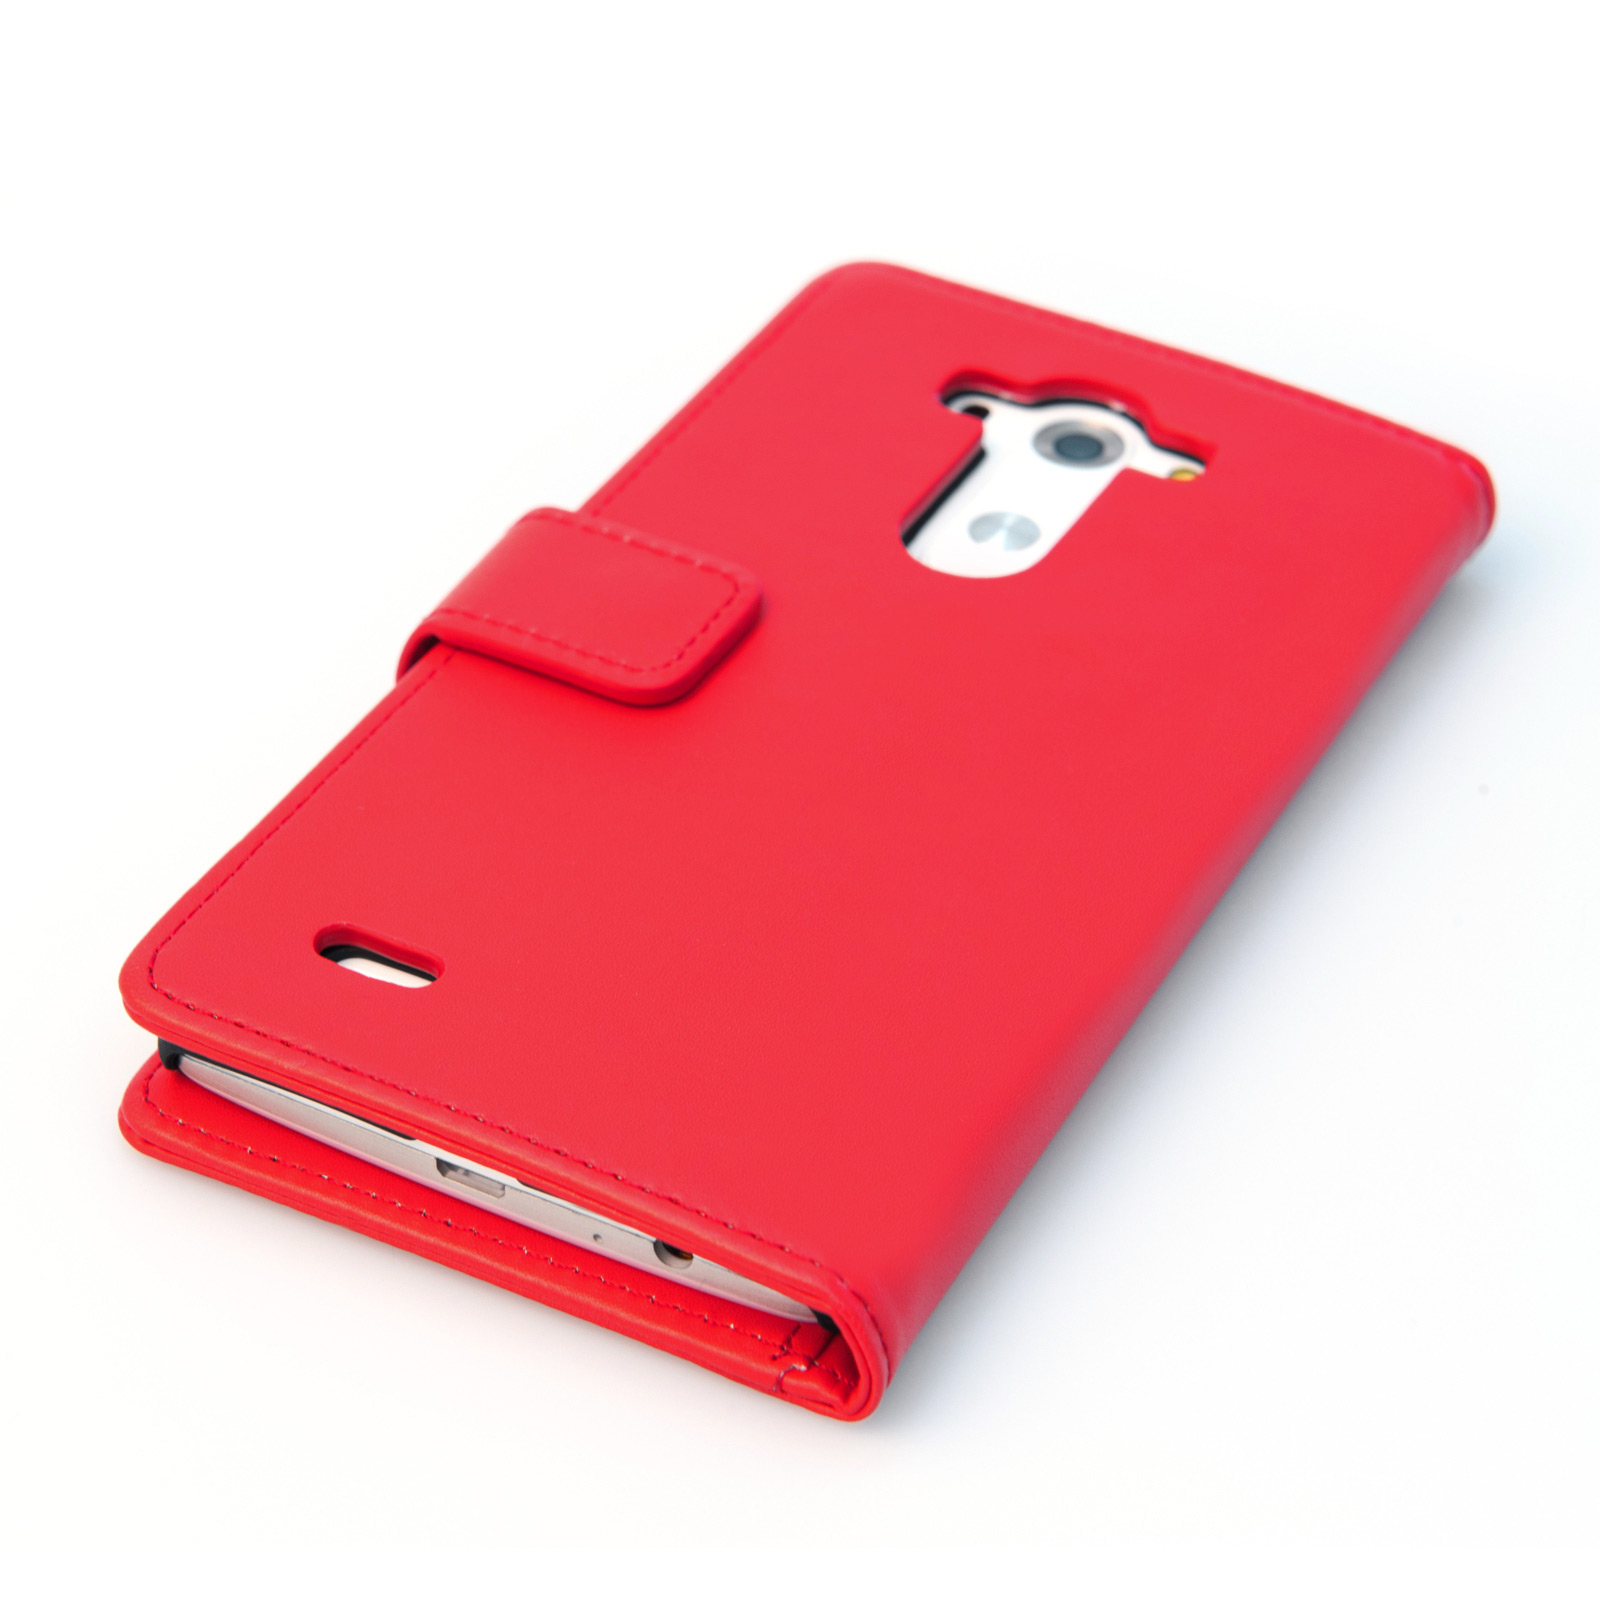 YouSave Accessories LG G3 Leather-Effect Wallet Case - Red